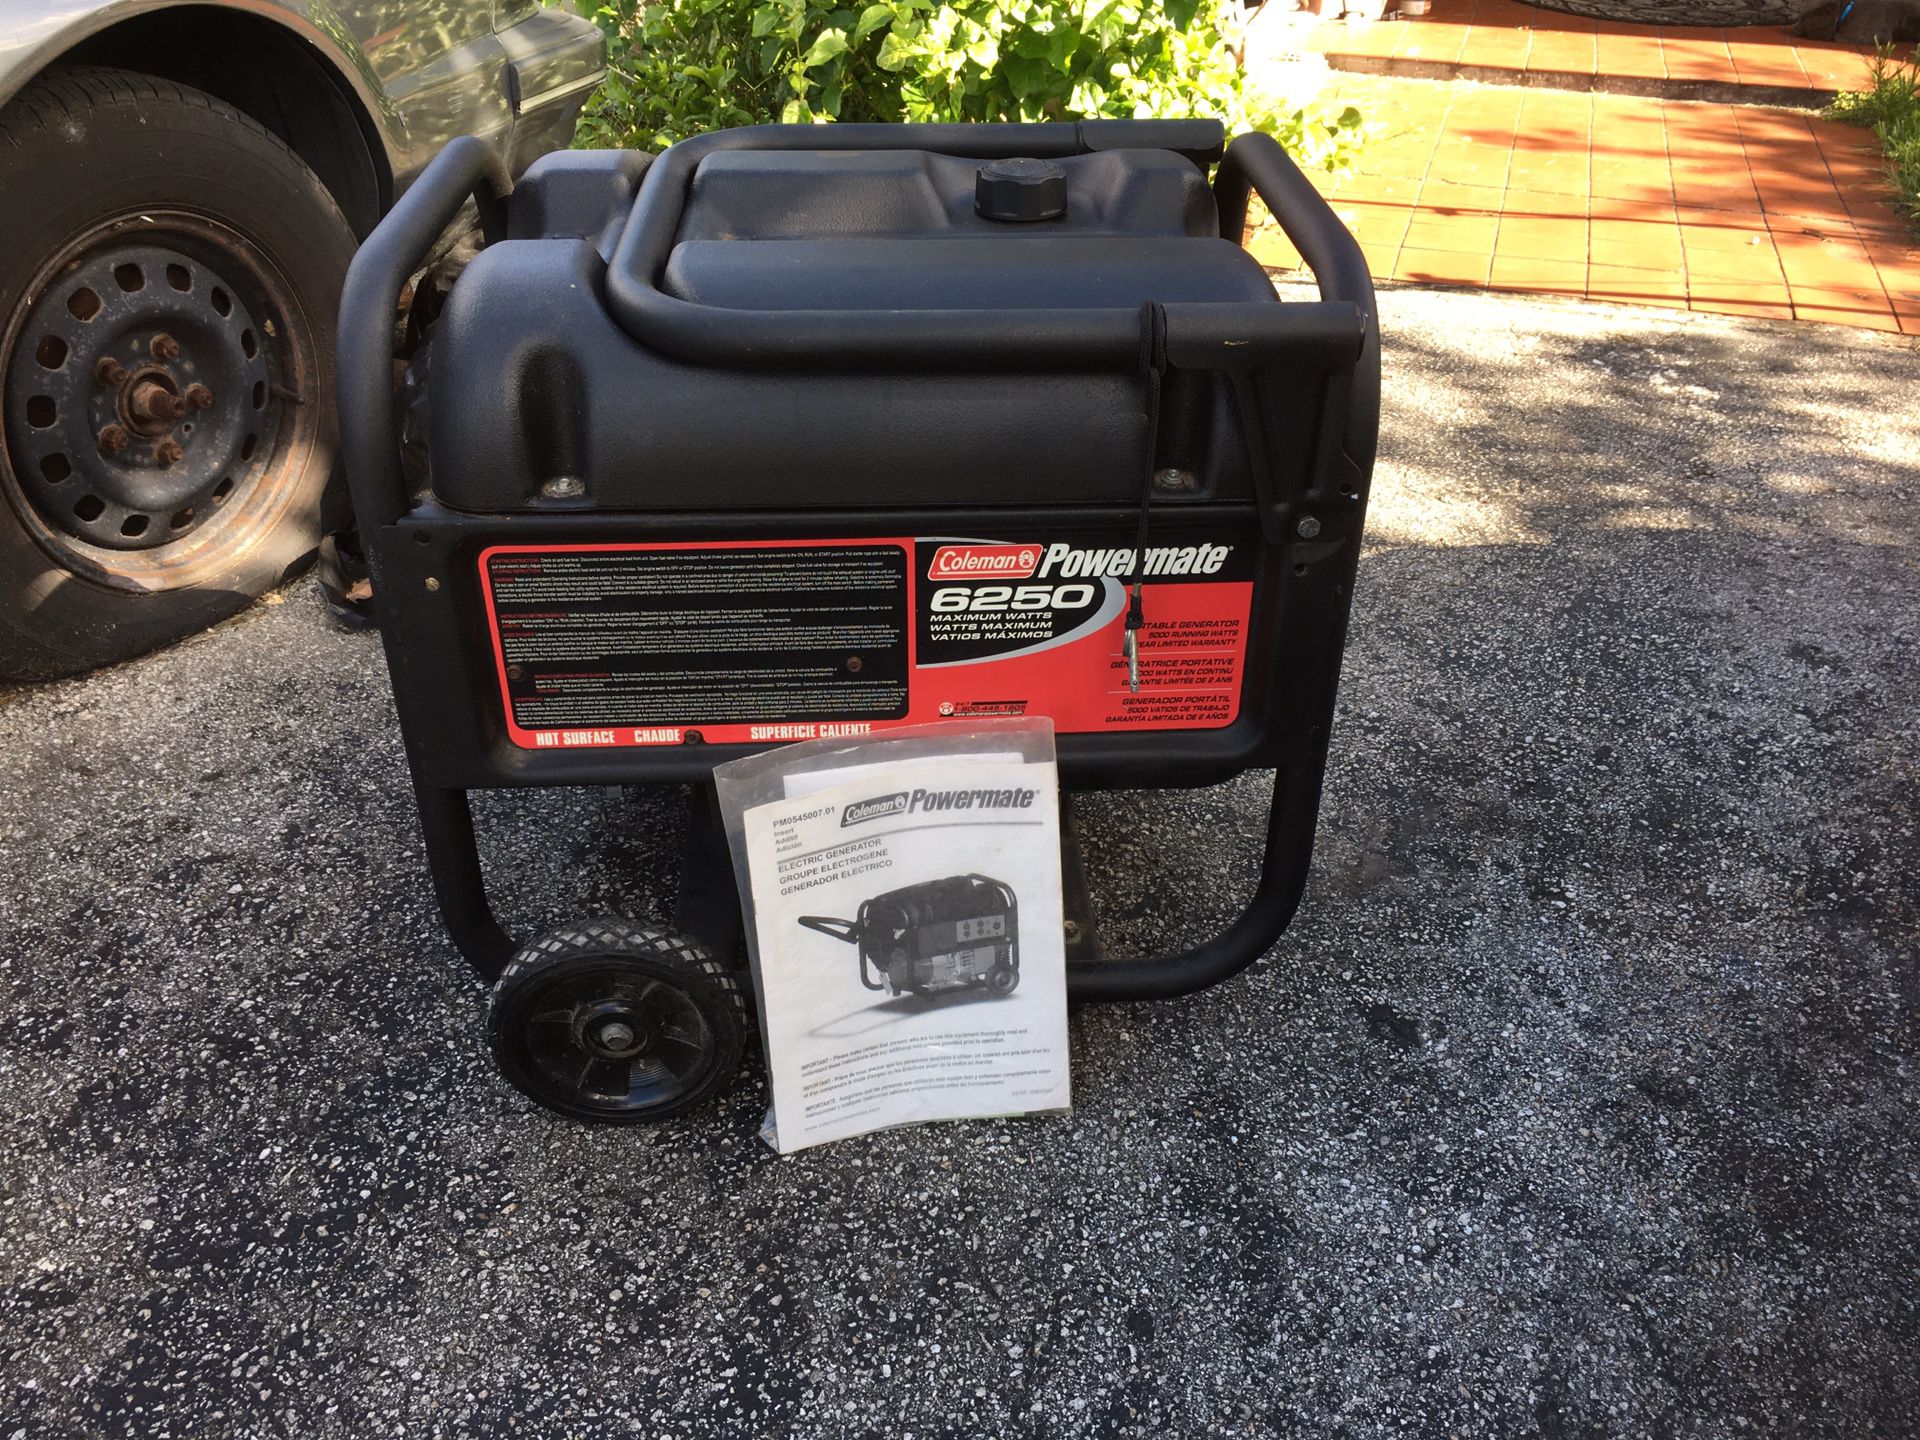 [MUST SEE] Coleman Powermate EXCELLENT CONDITION 6250 WATTS// COMES WITH MANUAL || Runs Perfect But Little More Than Usual Smoke Is Coming (VERY SMAL